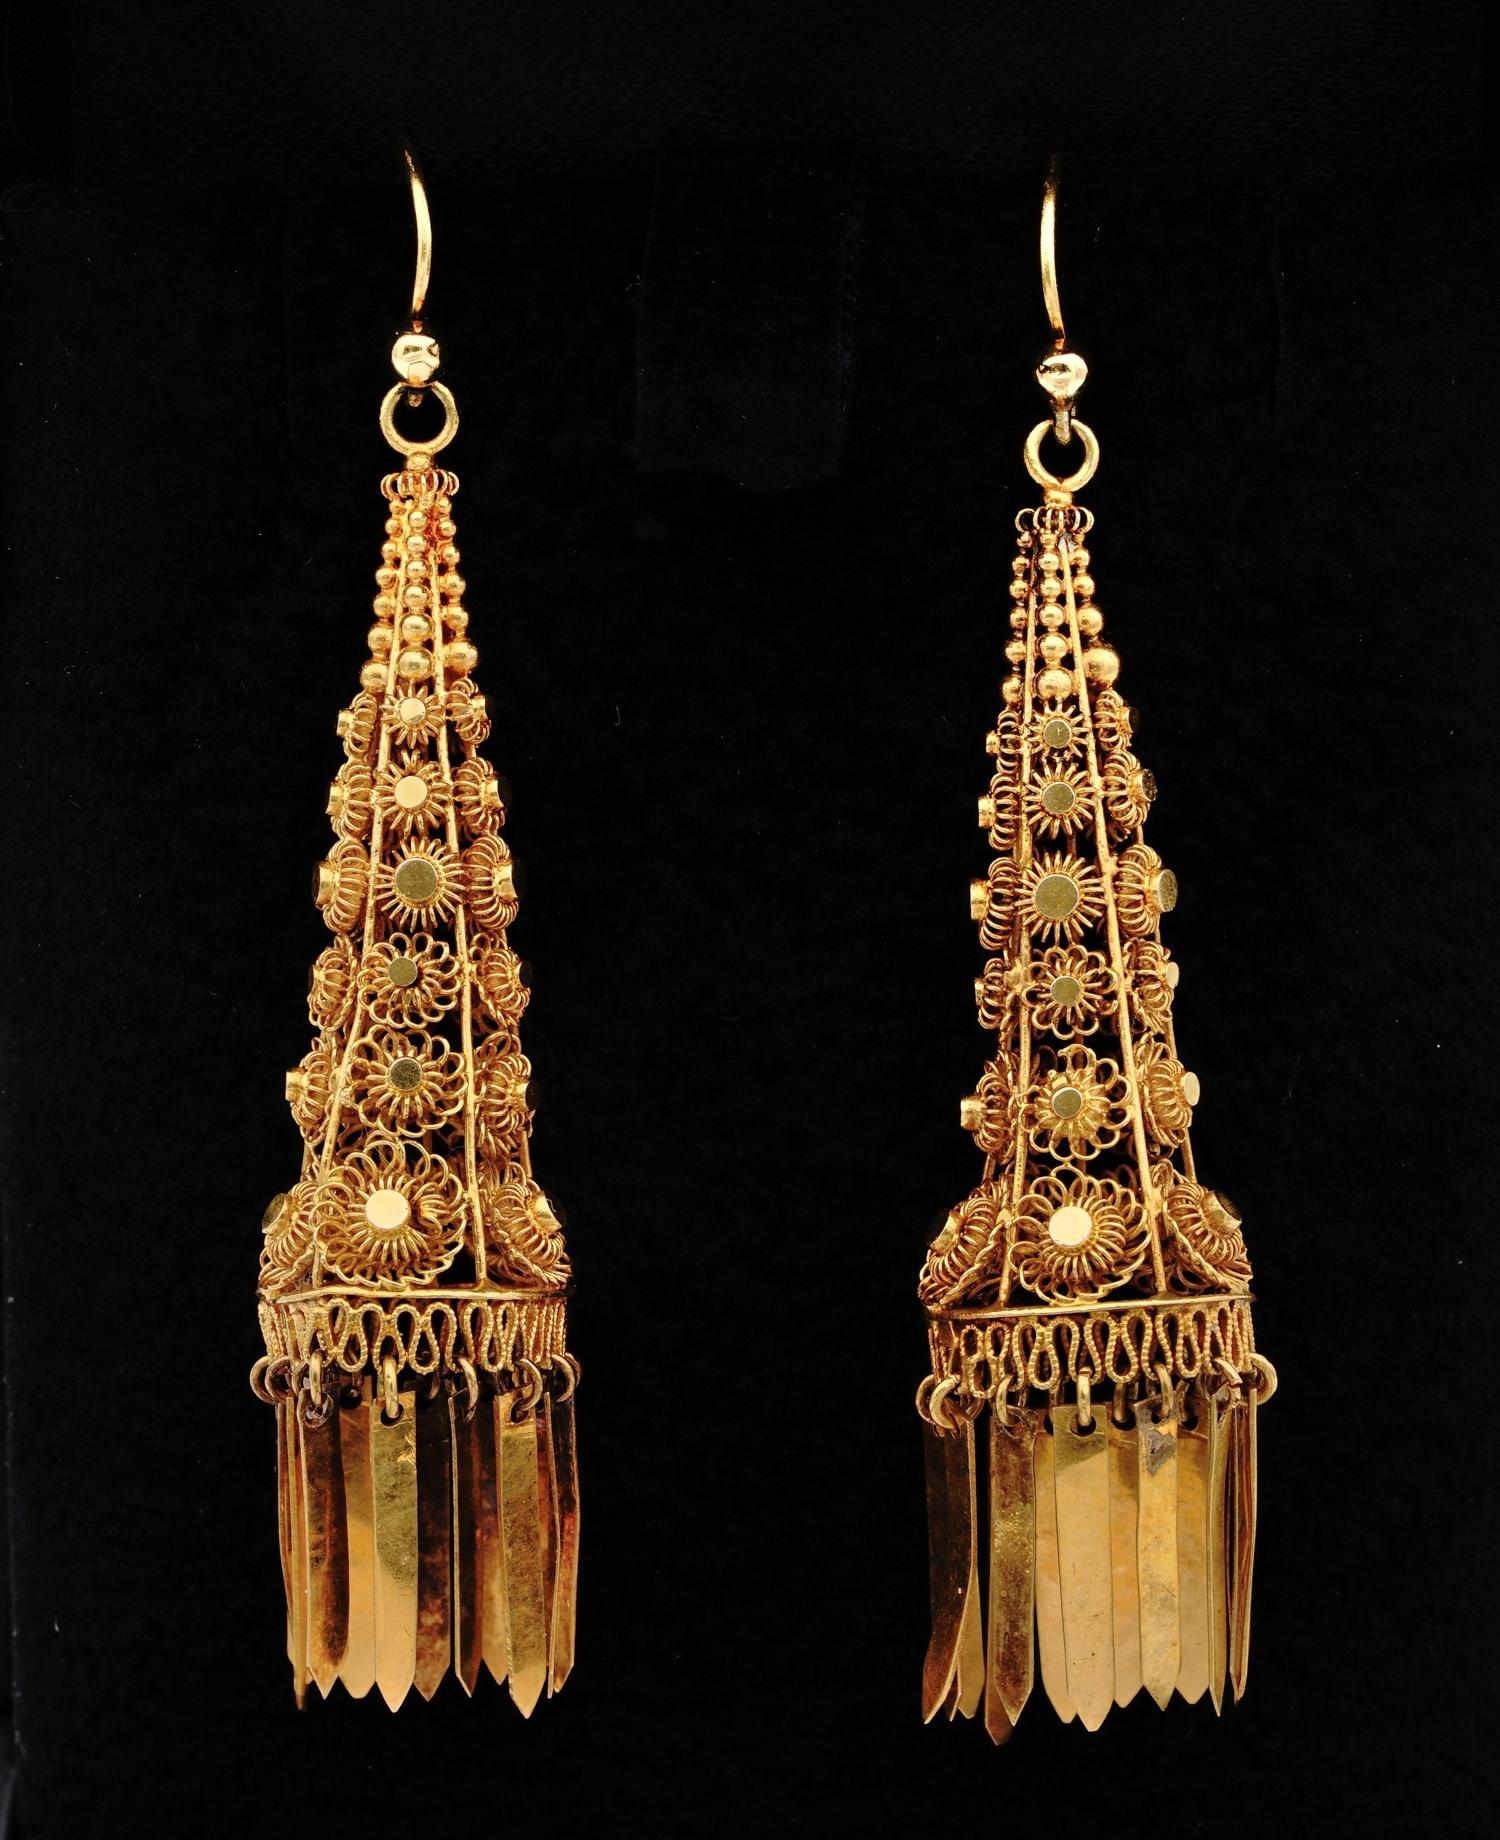 Sense Past Art

Artistry made of the rarest Cannetille work all solid 18 KT solid gold Georgian drop earrings in transition to the Regency period of richest colour of gold 1800/1820 ca
Of very charming elongated conical shape amazingly made by